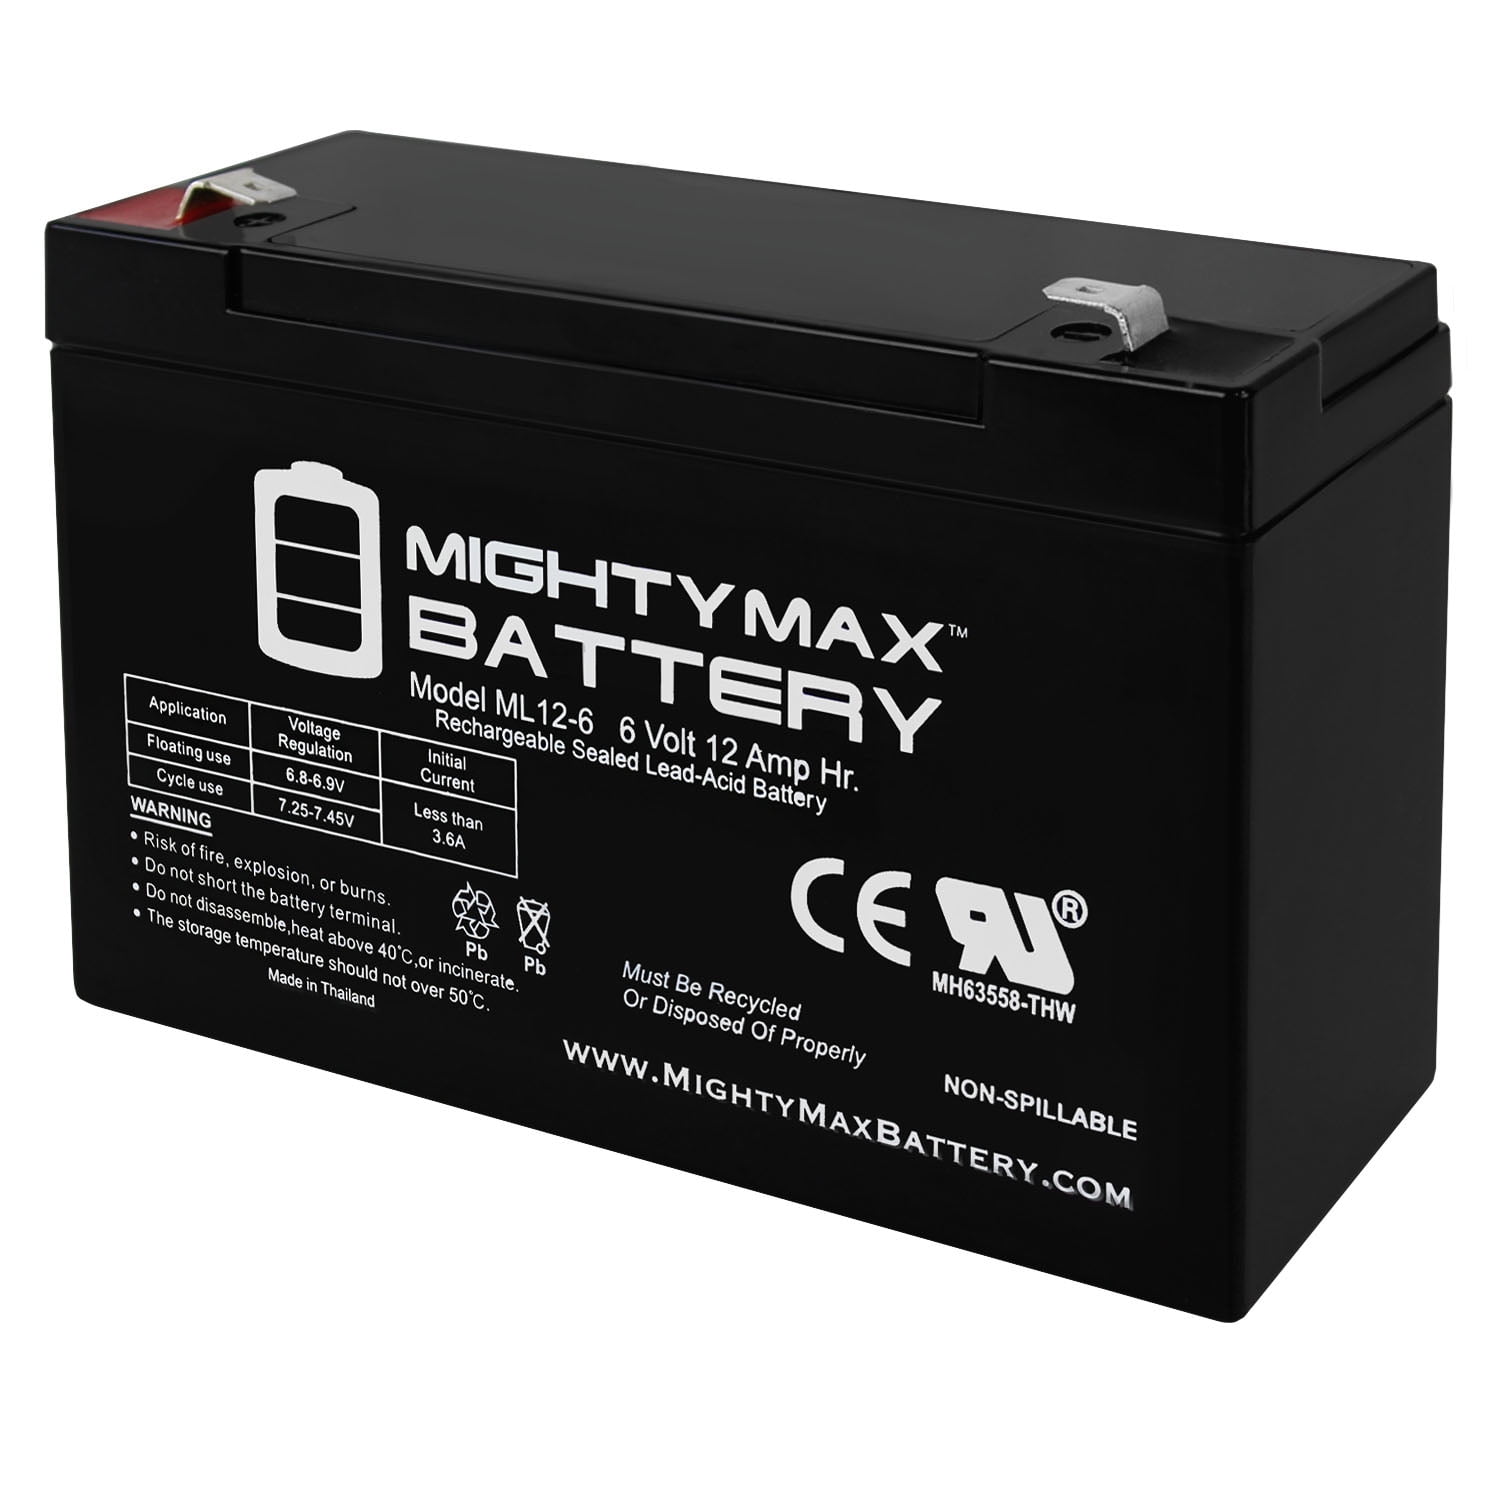 NEW CAT BULLDOZER REPLACEMENT KID TRAX 12 VOLT BATTERY CHARGER 